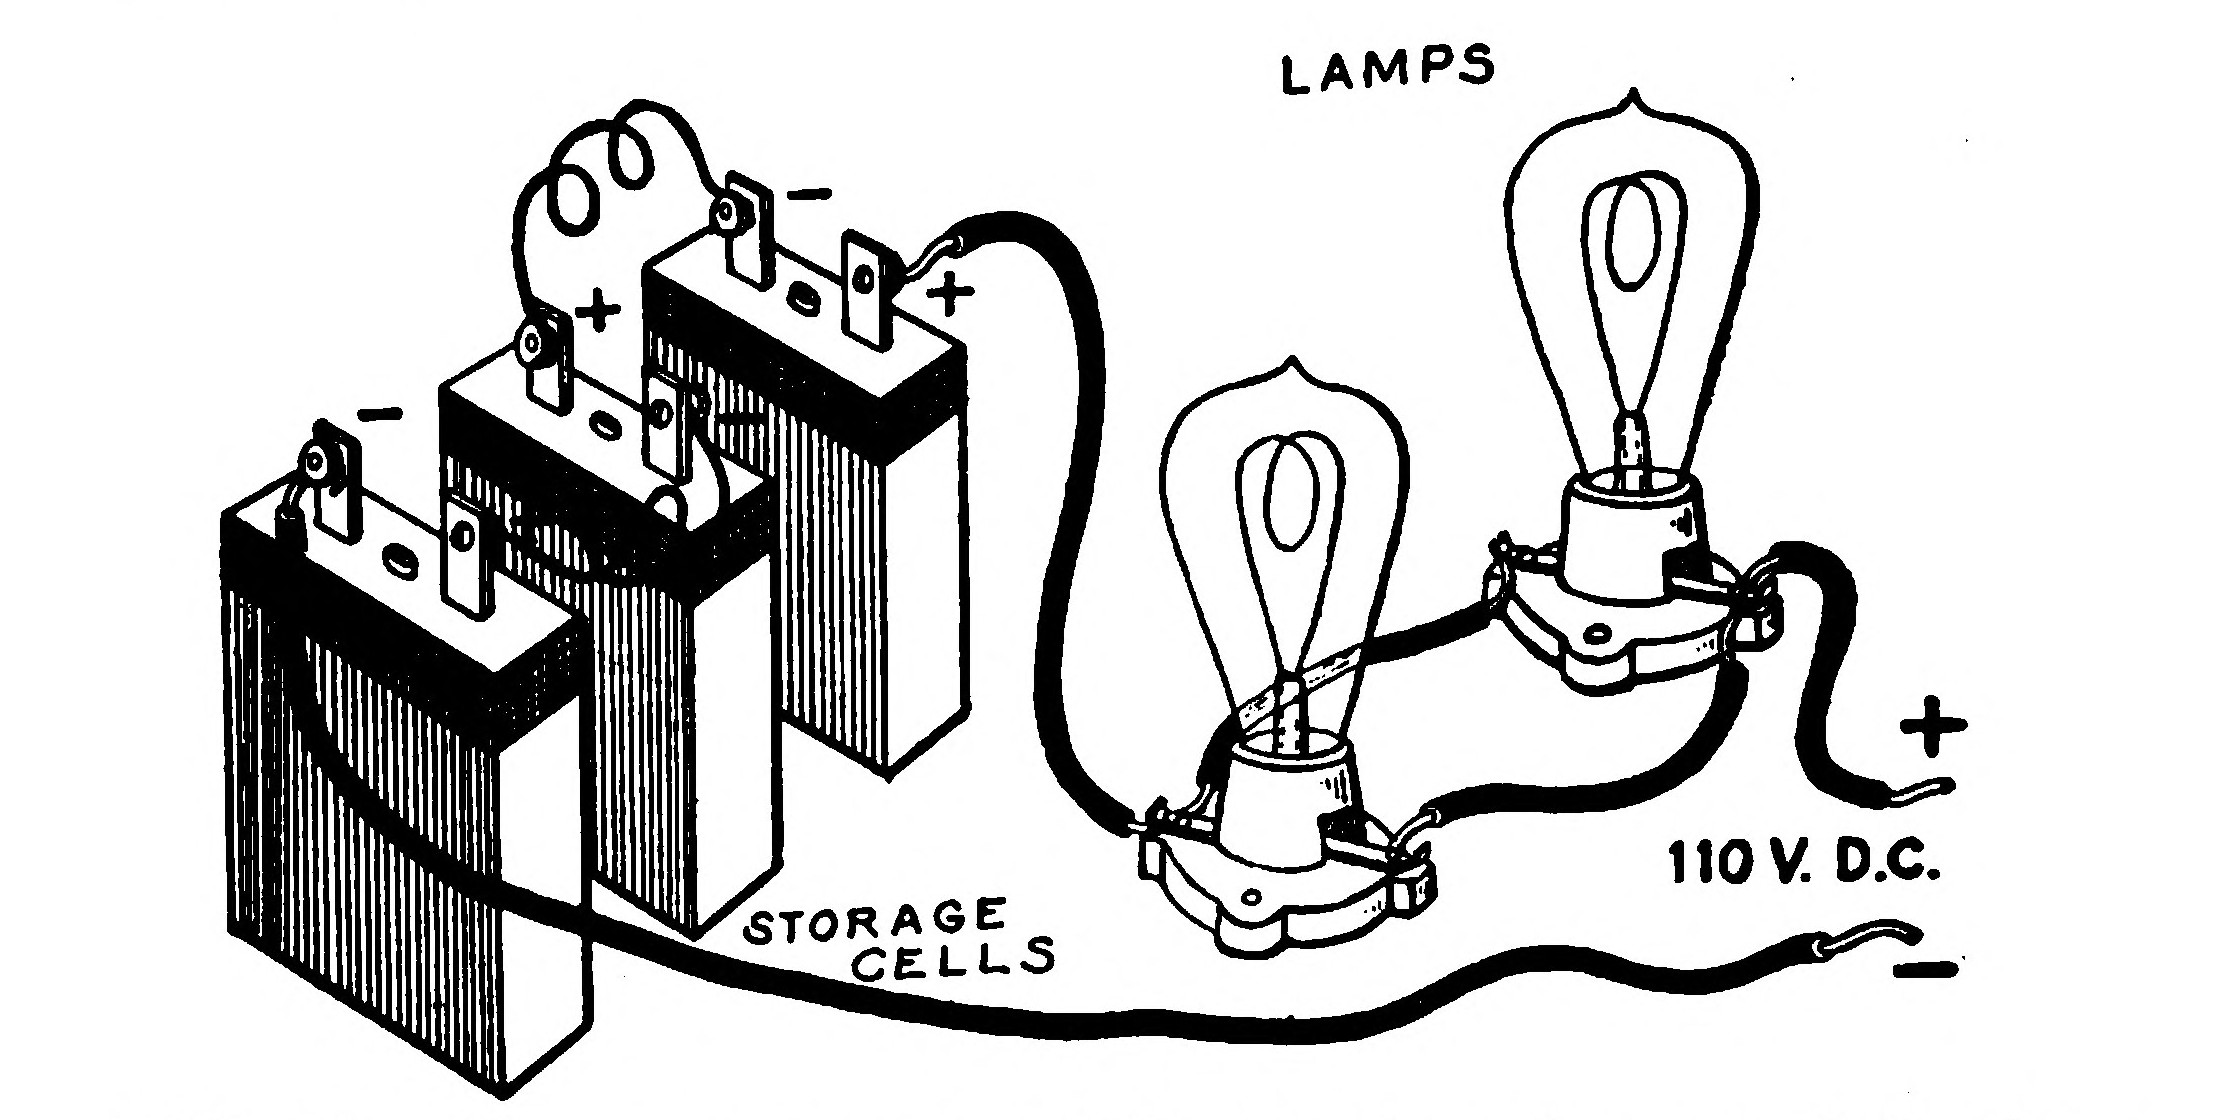 FIG. 47.—The proper way of Recharging Storage Cells from the 110 Volts D. C. Supply in series with a set of Lamps.